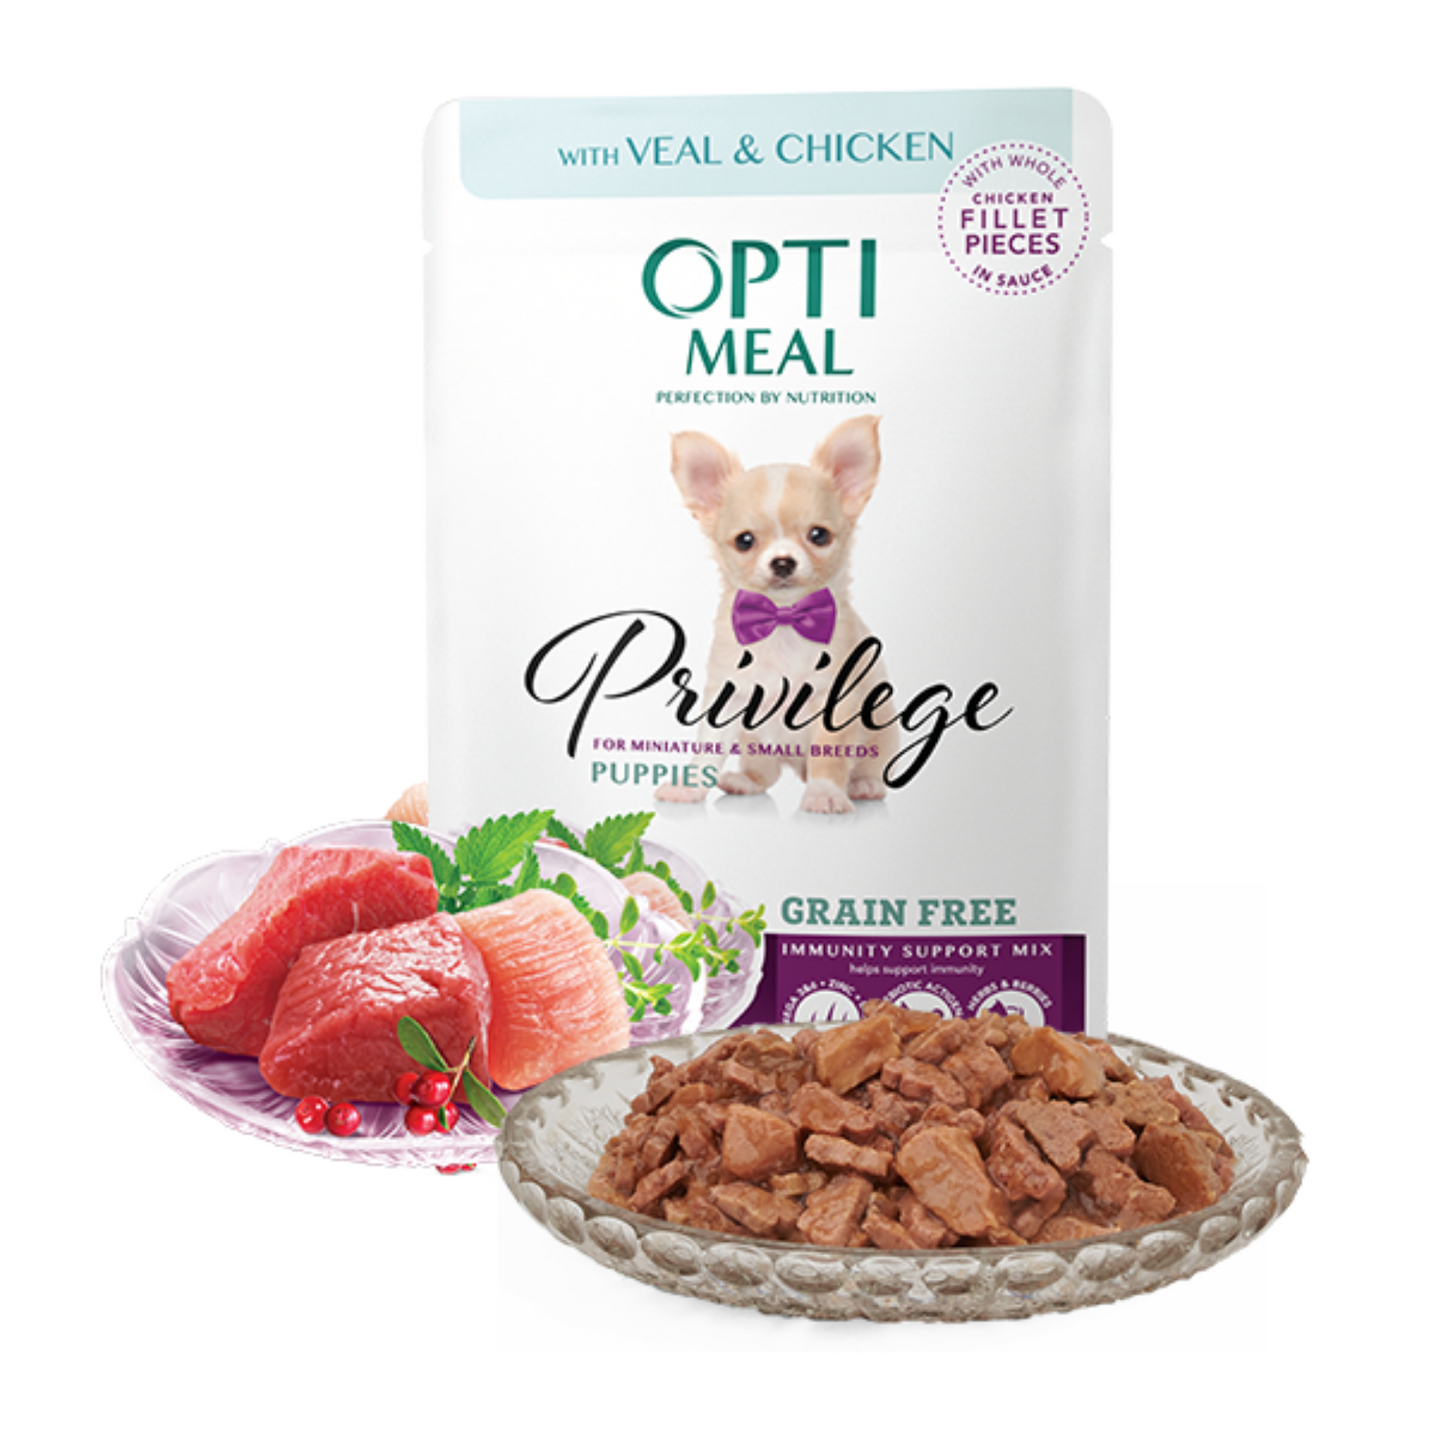 OPTIMEAL Privilege Grain Free Pouches for puppies of miniature and small breeds with Veal and Chicken Fillet in sauce